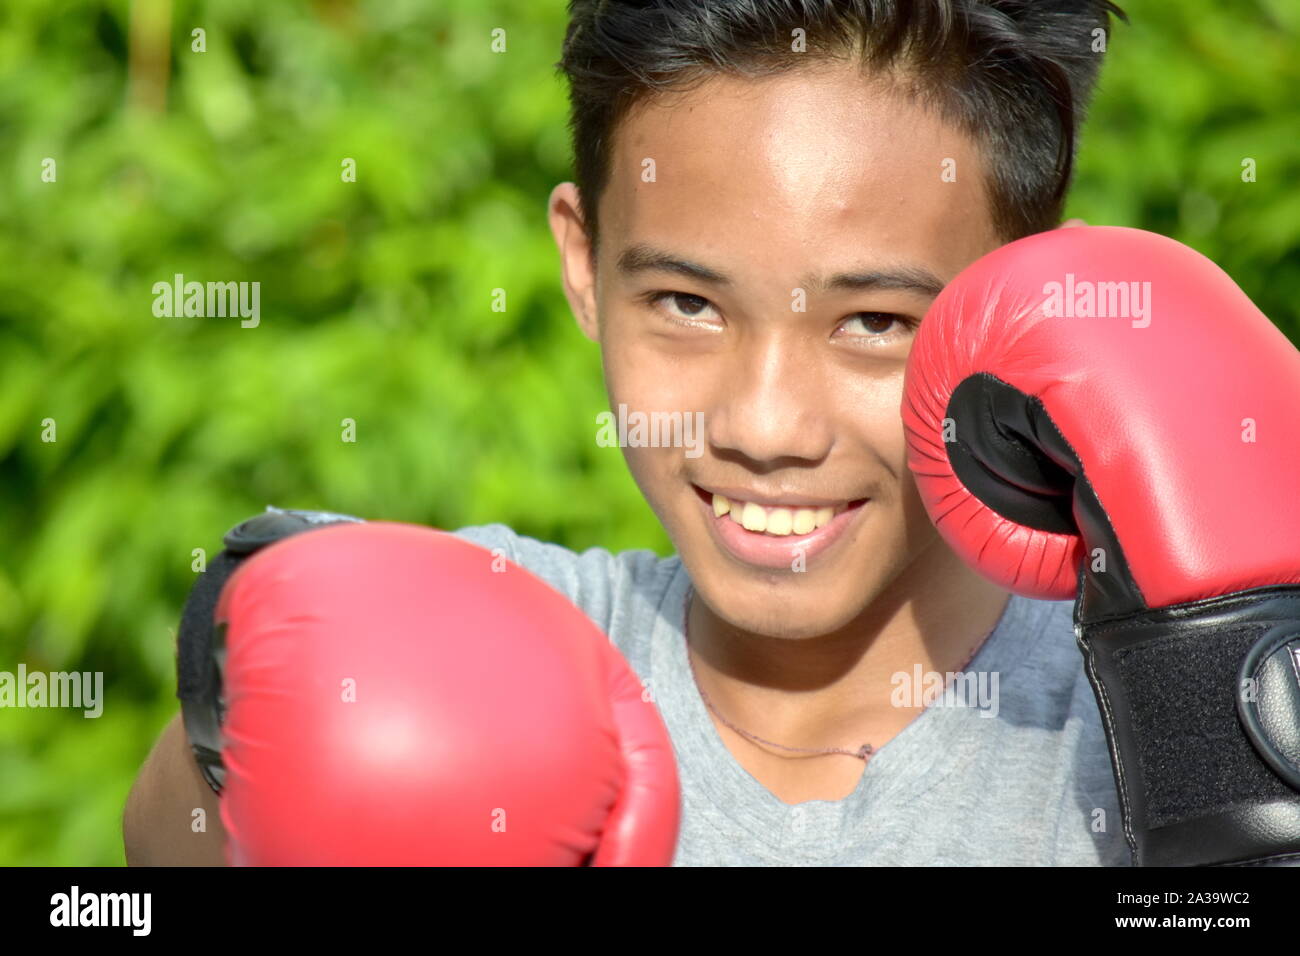 Fit Male Boxer Smiling Wearing Boxing Gloves Stock Photo